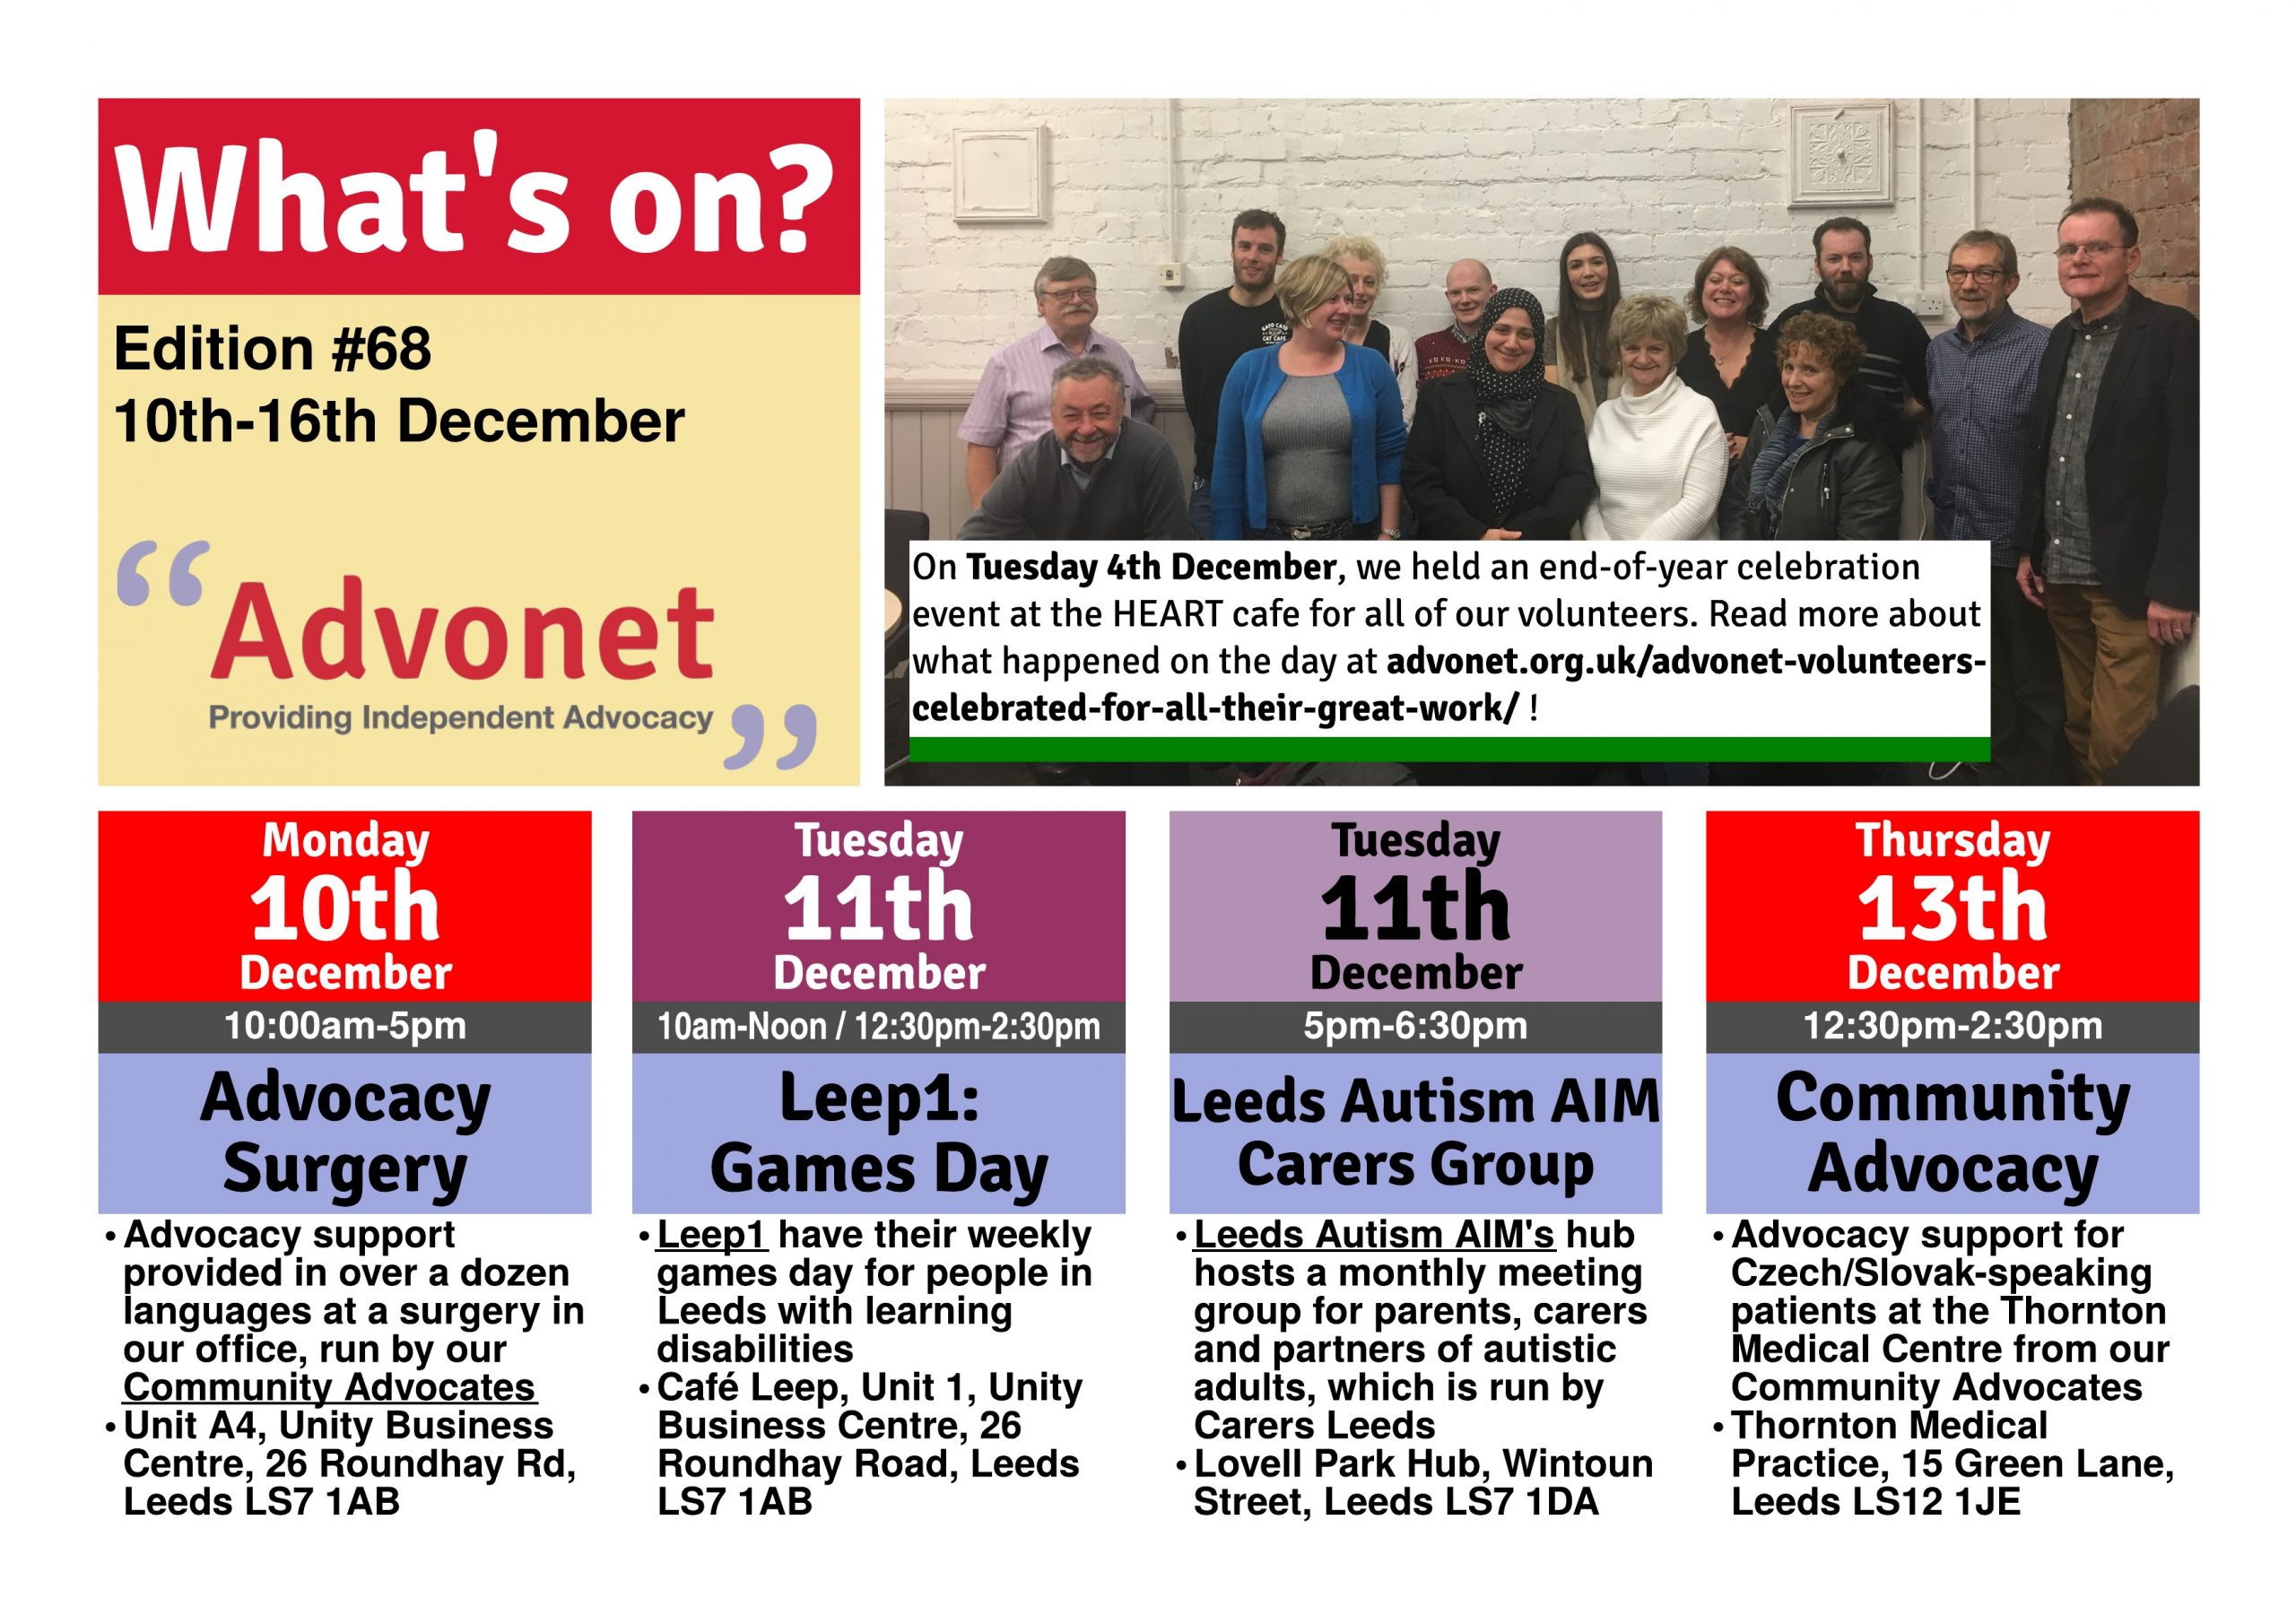 What's On - 10th-16th December 2018